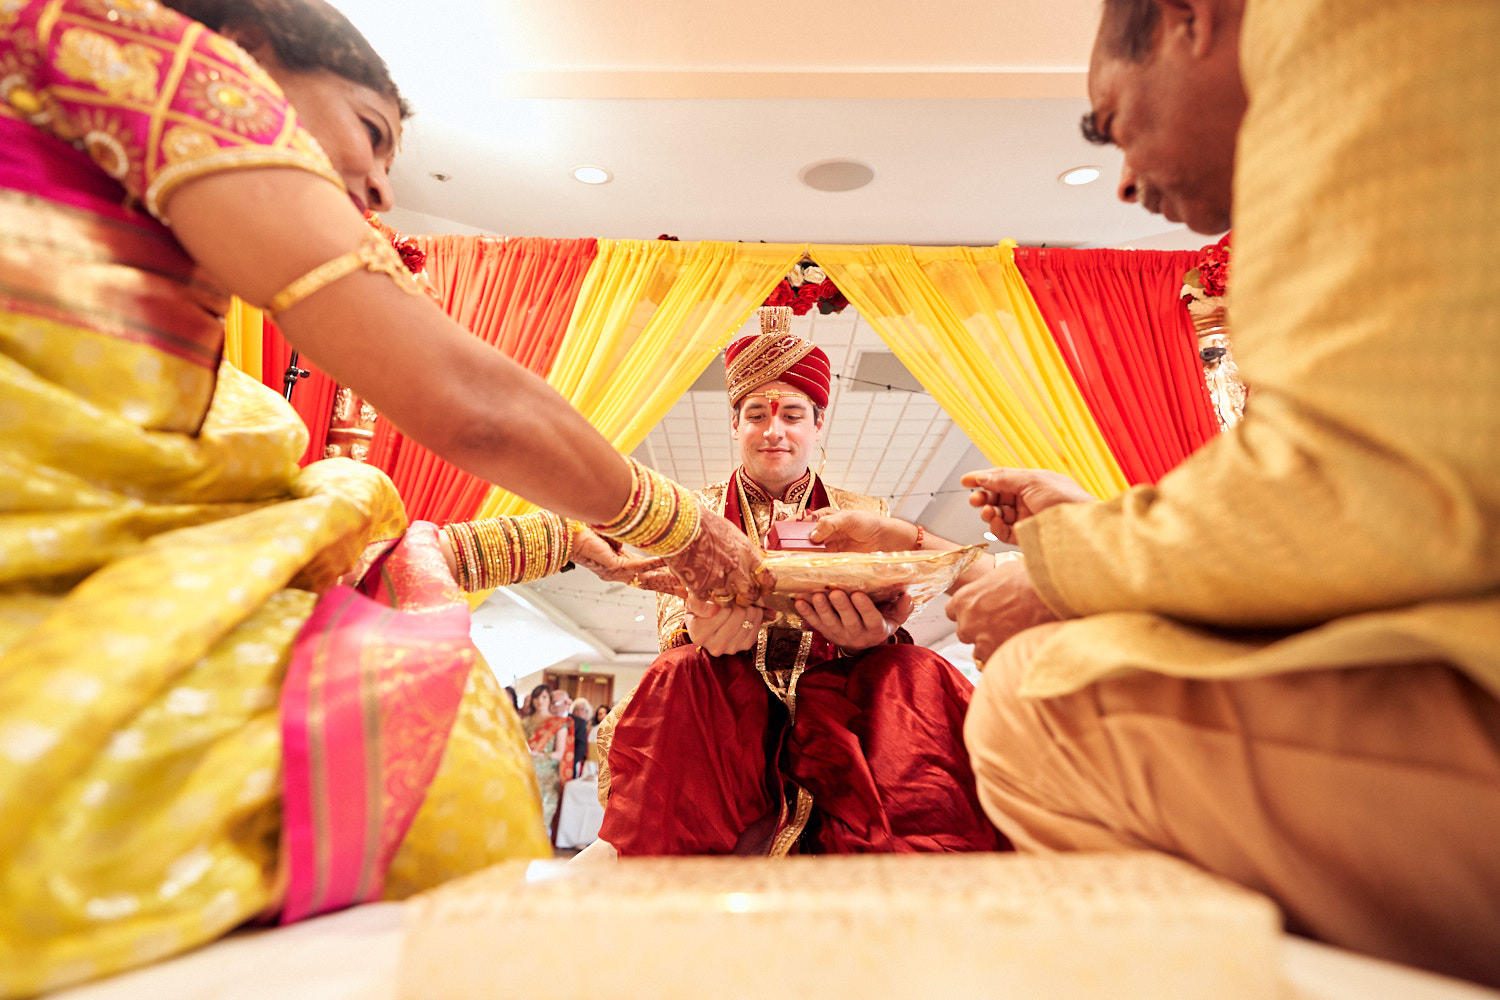 south-indian-wedding-ceremony-photography-by-afewgoodclicks-net-in-saratoga 98.jpg